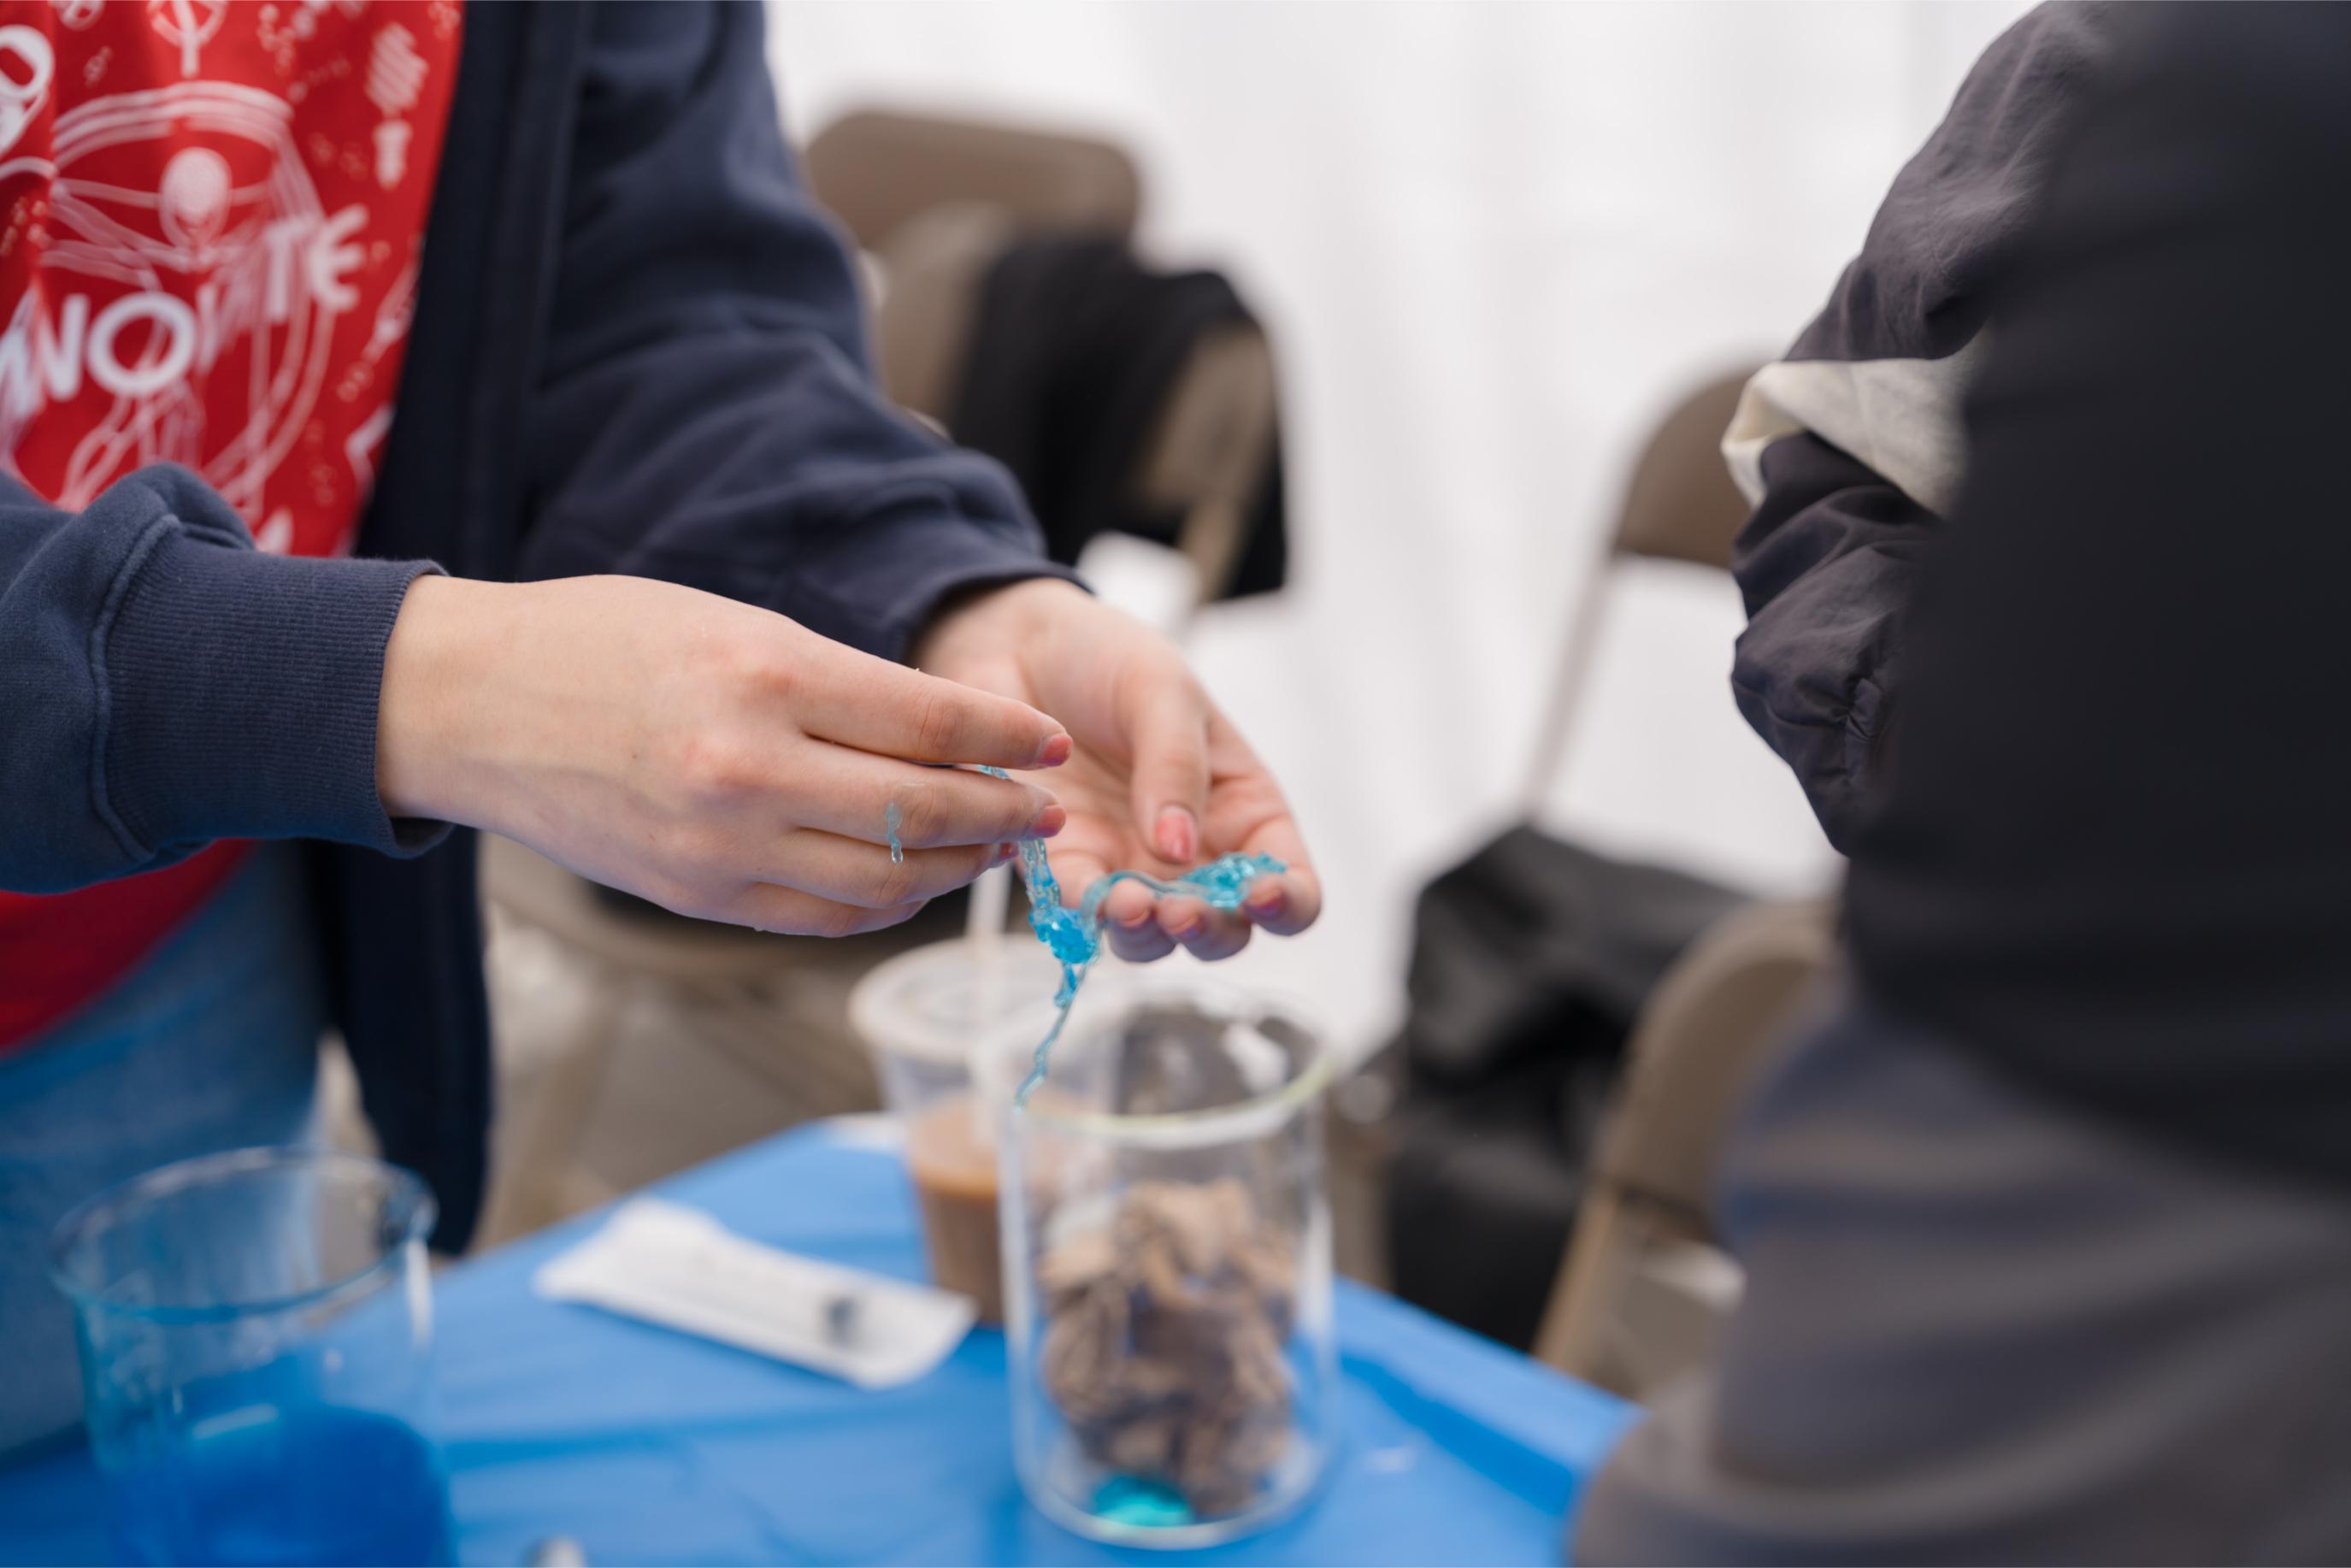 A volunteer holding a blue slime at the Food Science Now Booth.